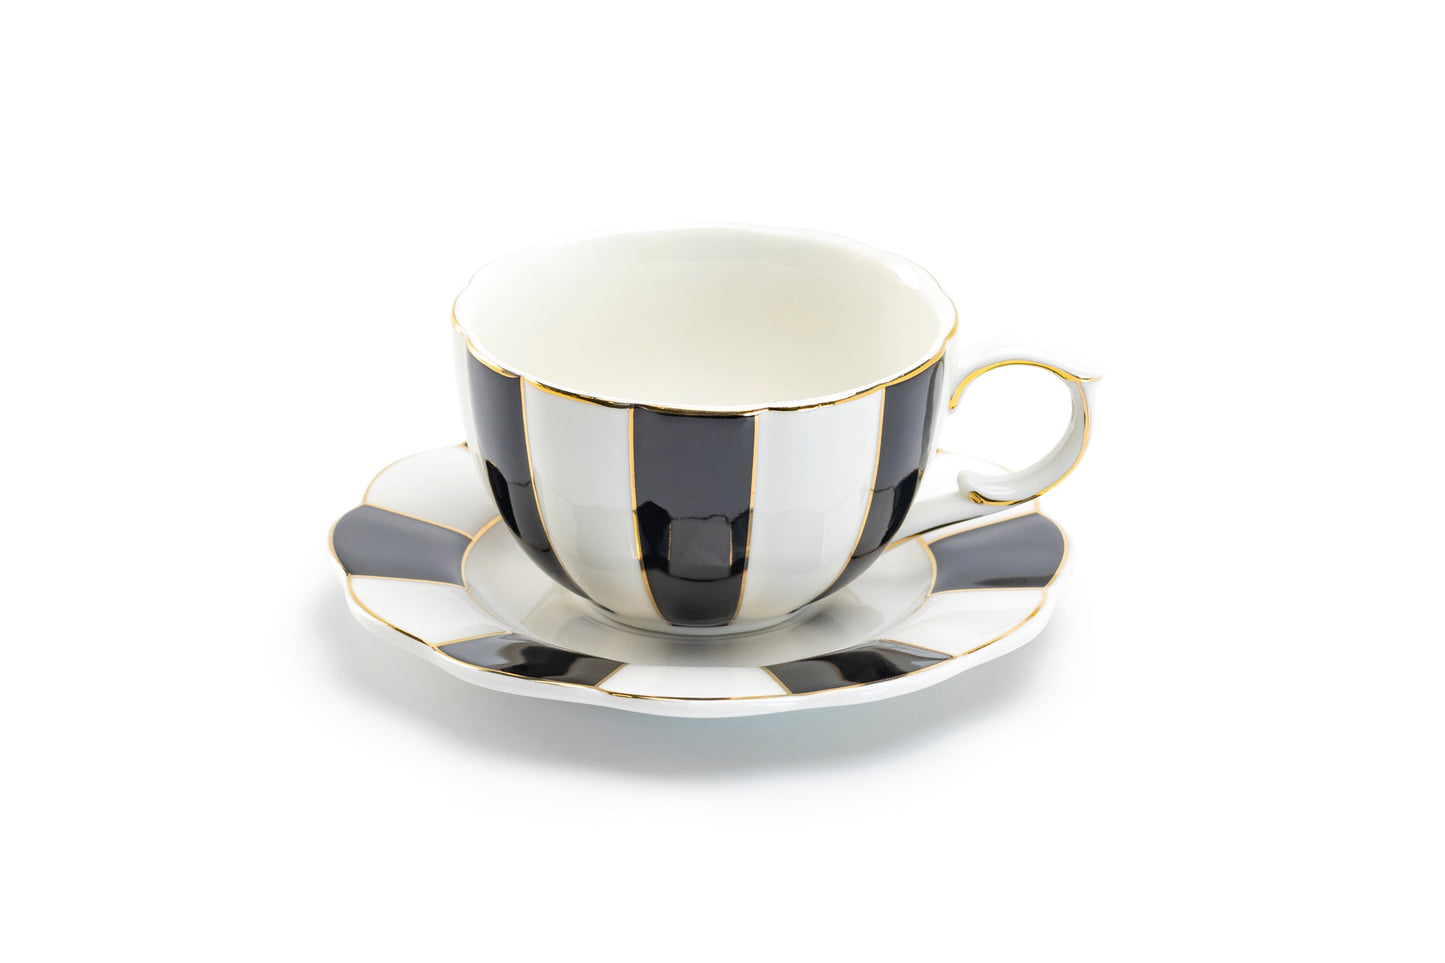 Grace Teaware Black and White Scallop Fine Porcelain Tea Cup and Saucer Set